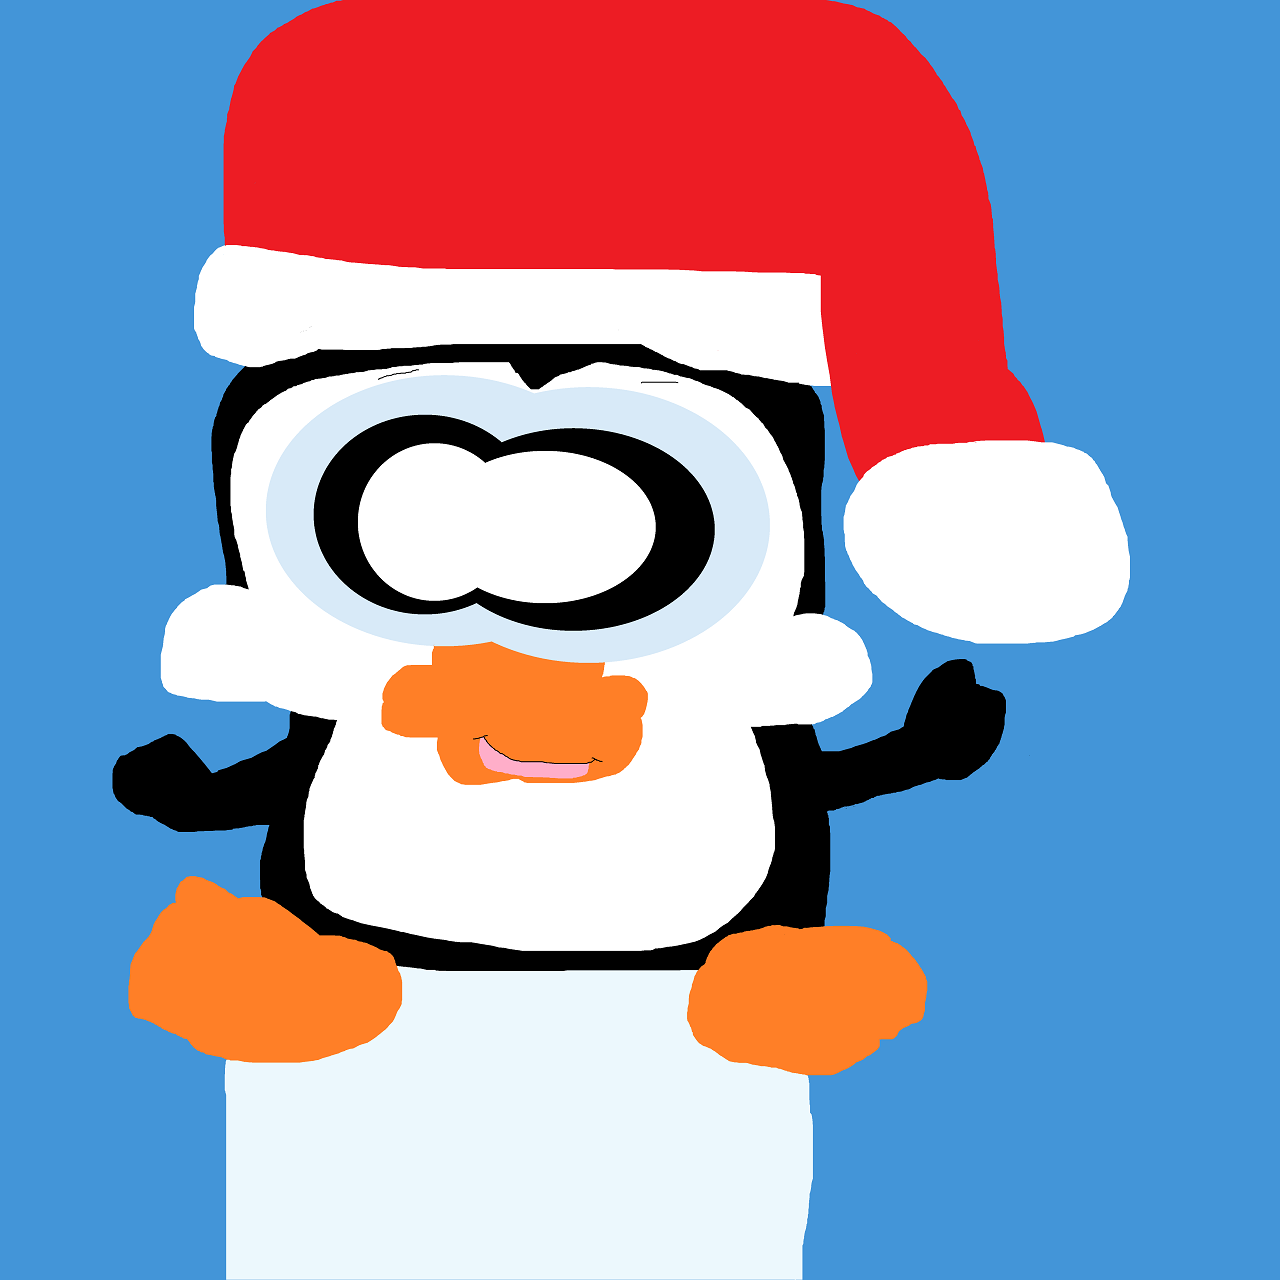 Early Xmas In July Penguin Chilly Willy by Falconlobo